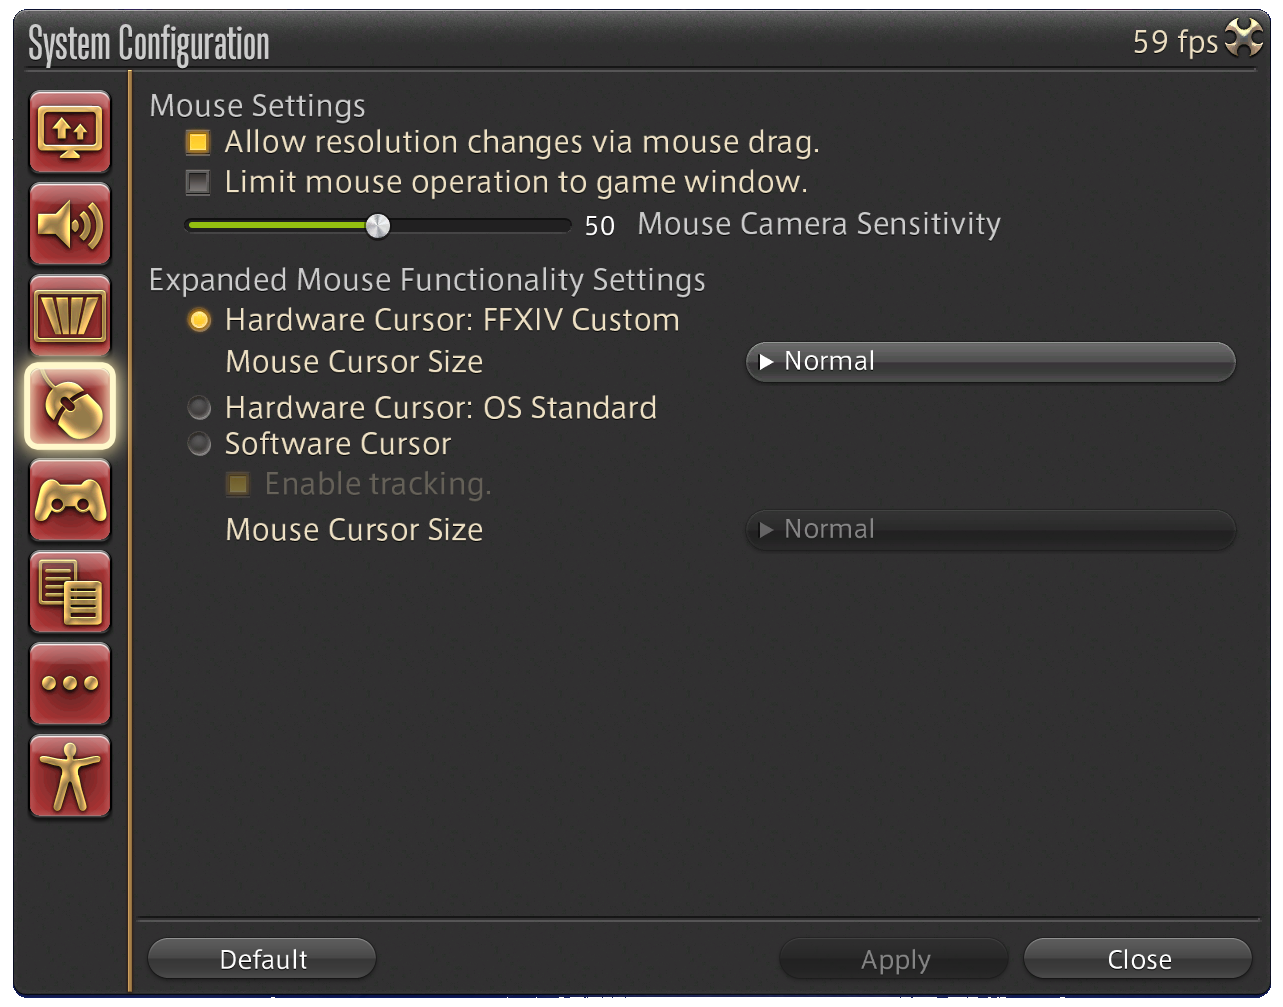 System Configuration - PC - Mouse Settings